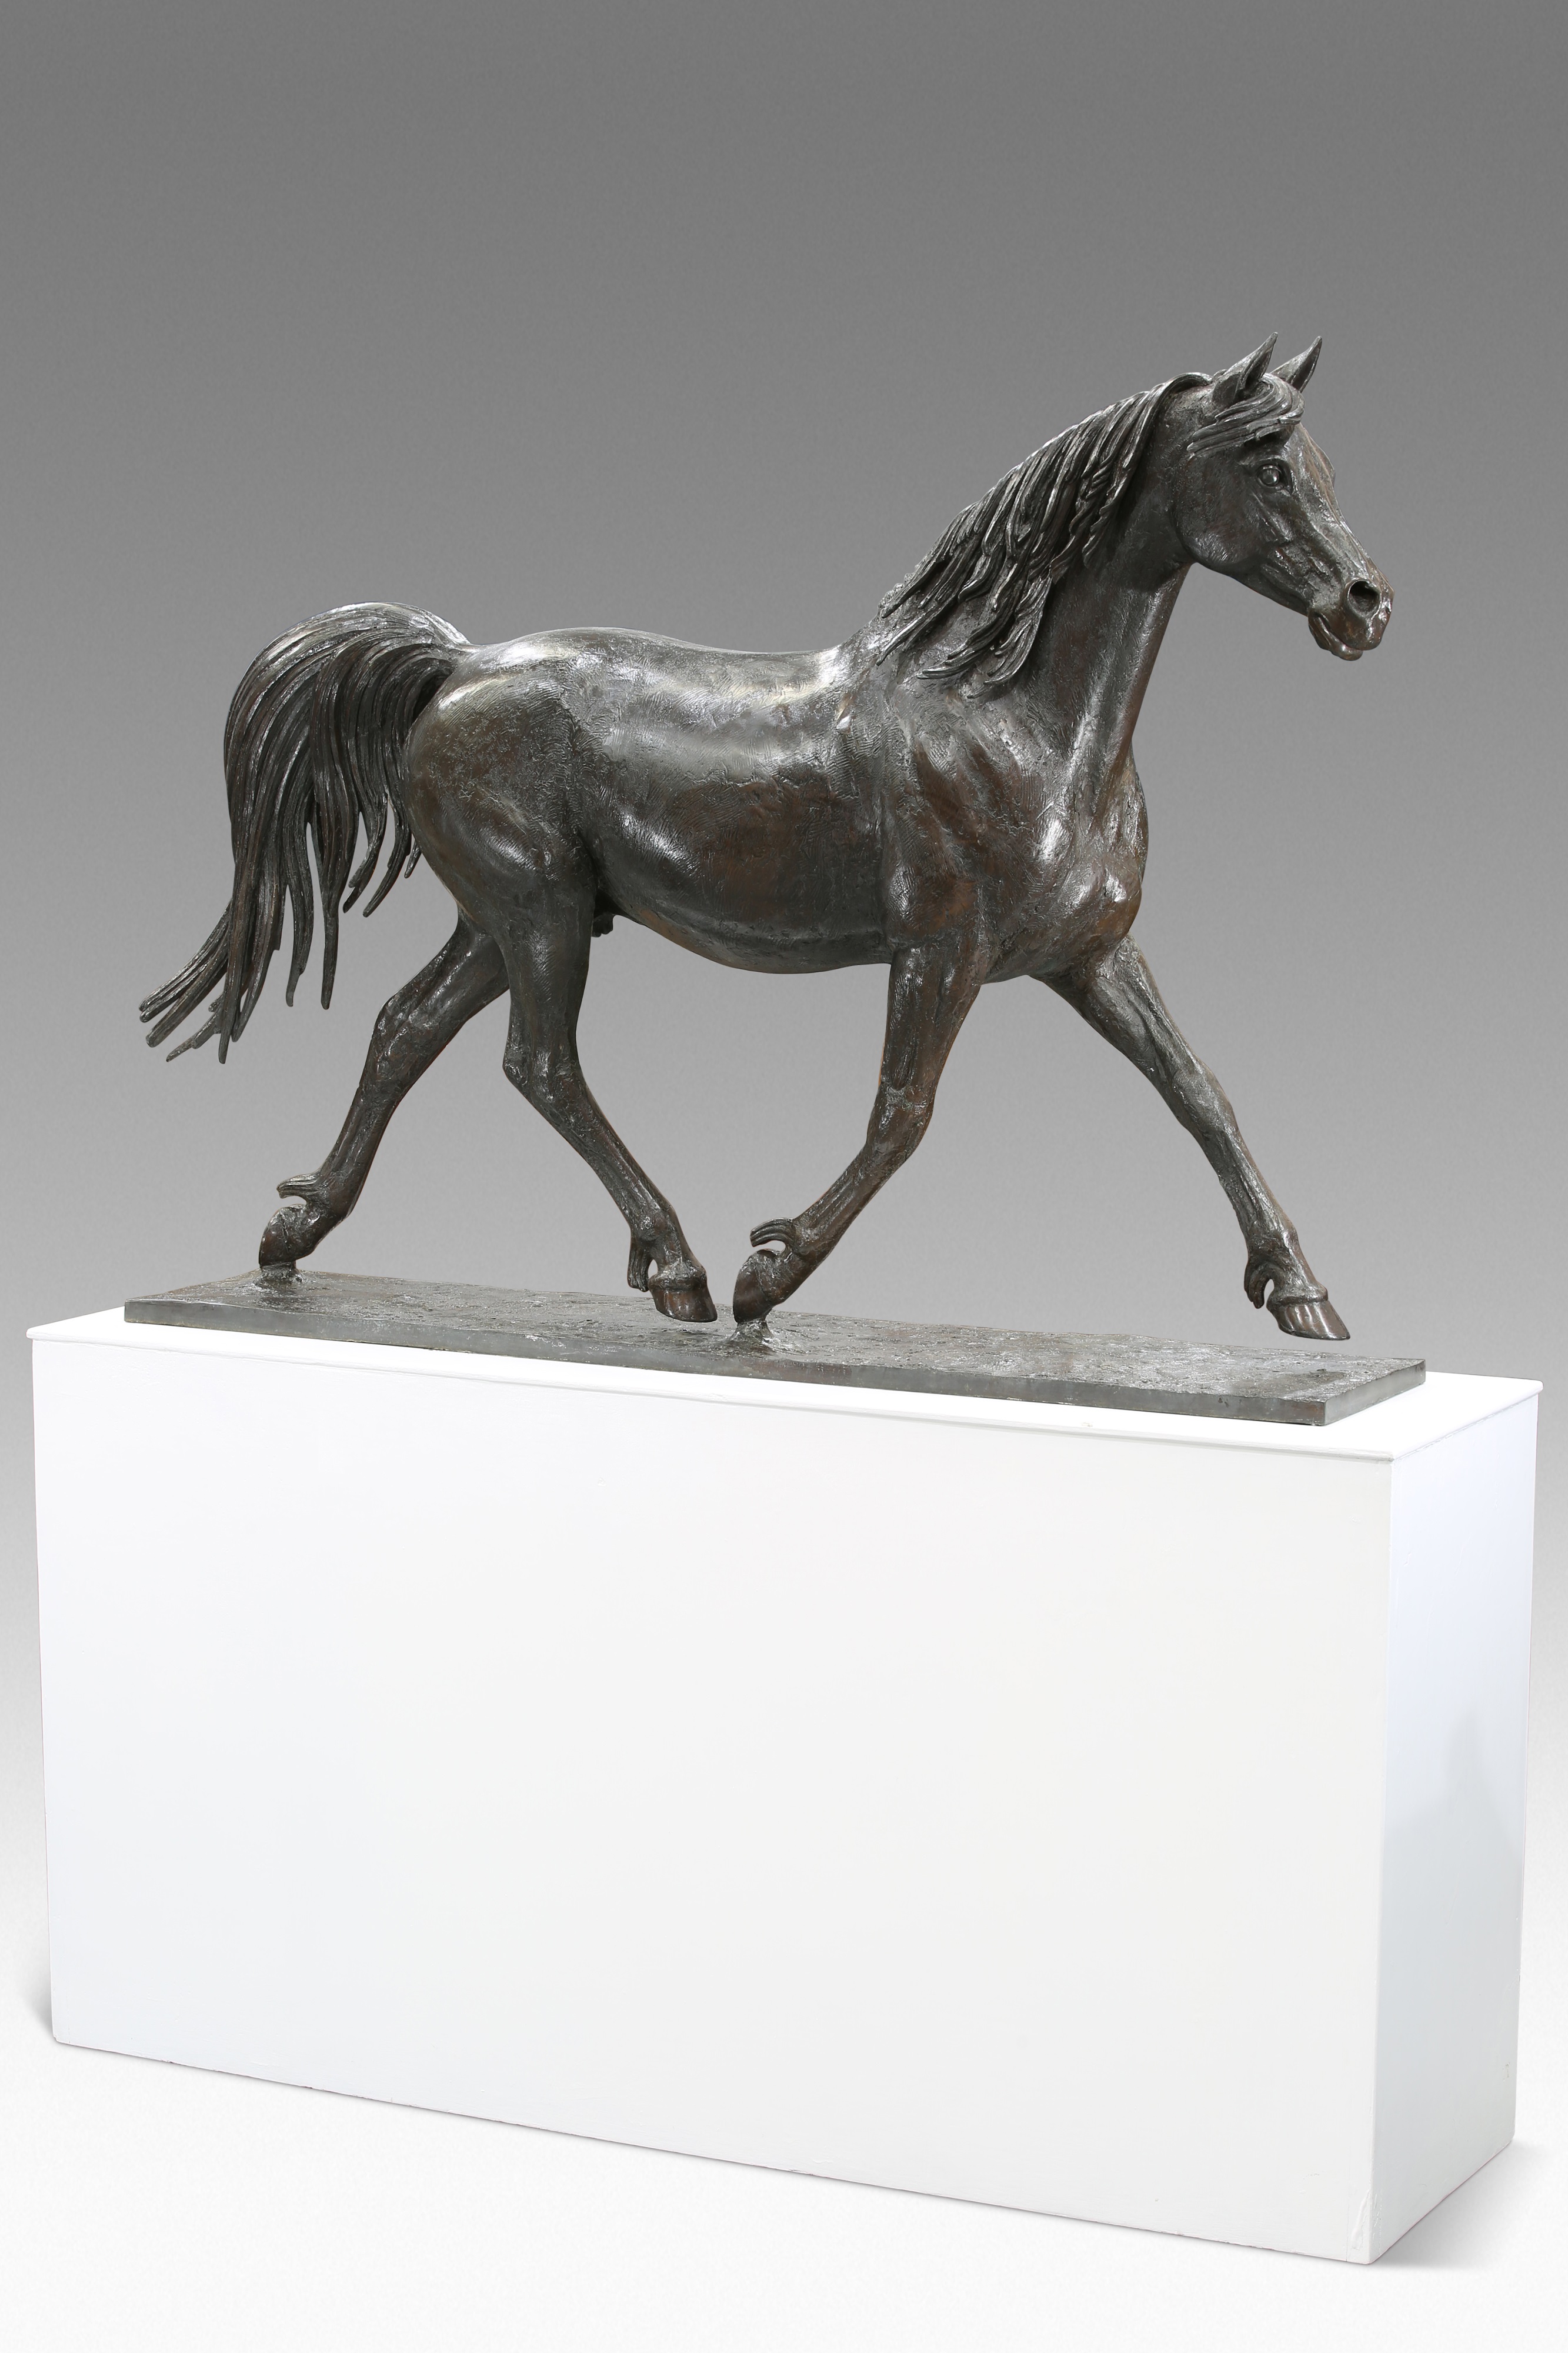 BRONZE HORSE SET TO SHOW OFF ITS PACES AT AUCTION